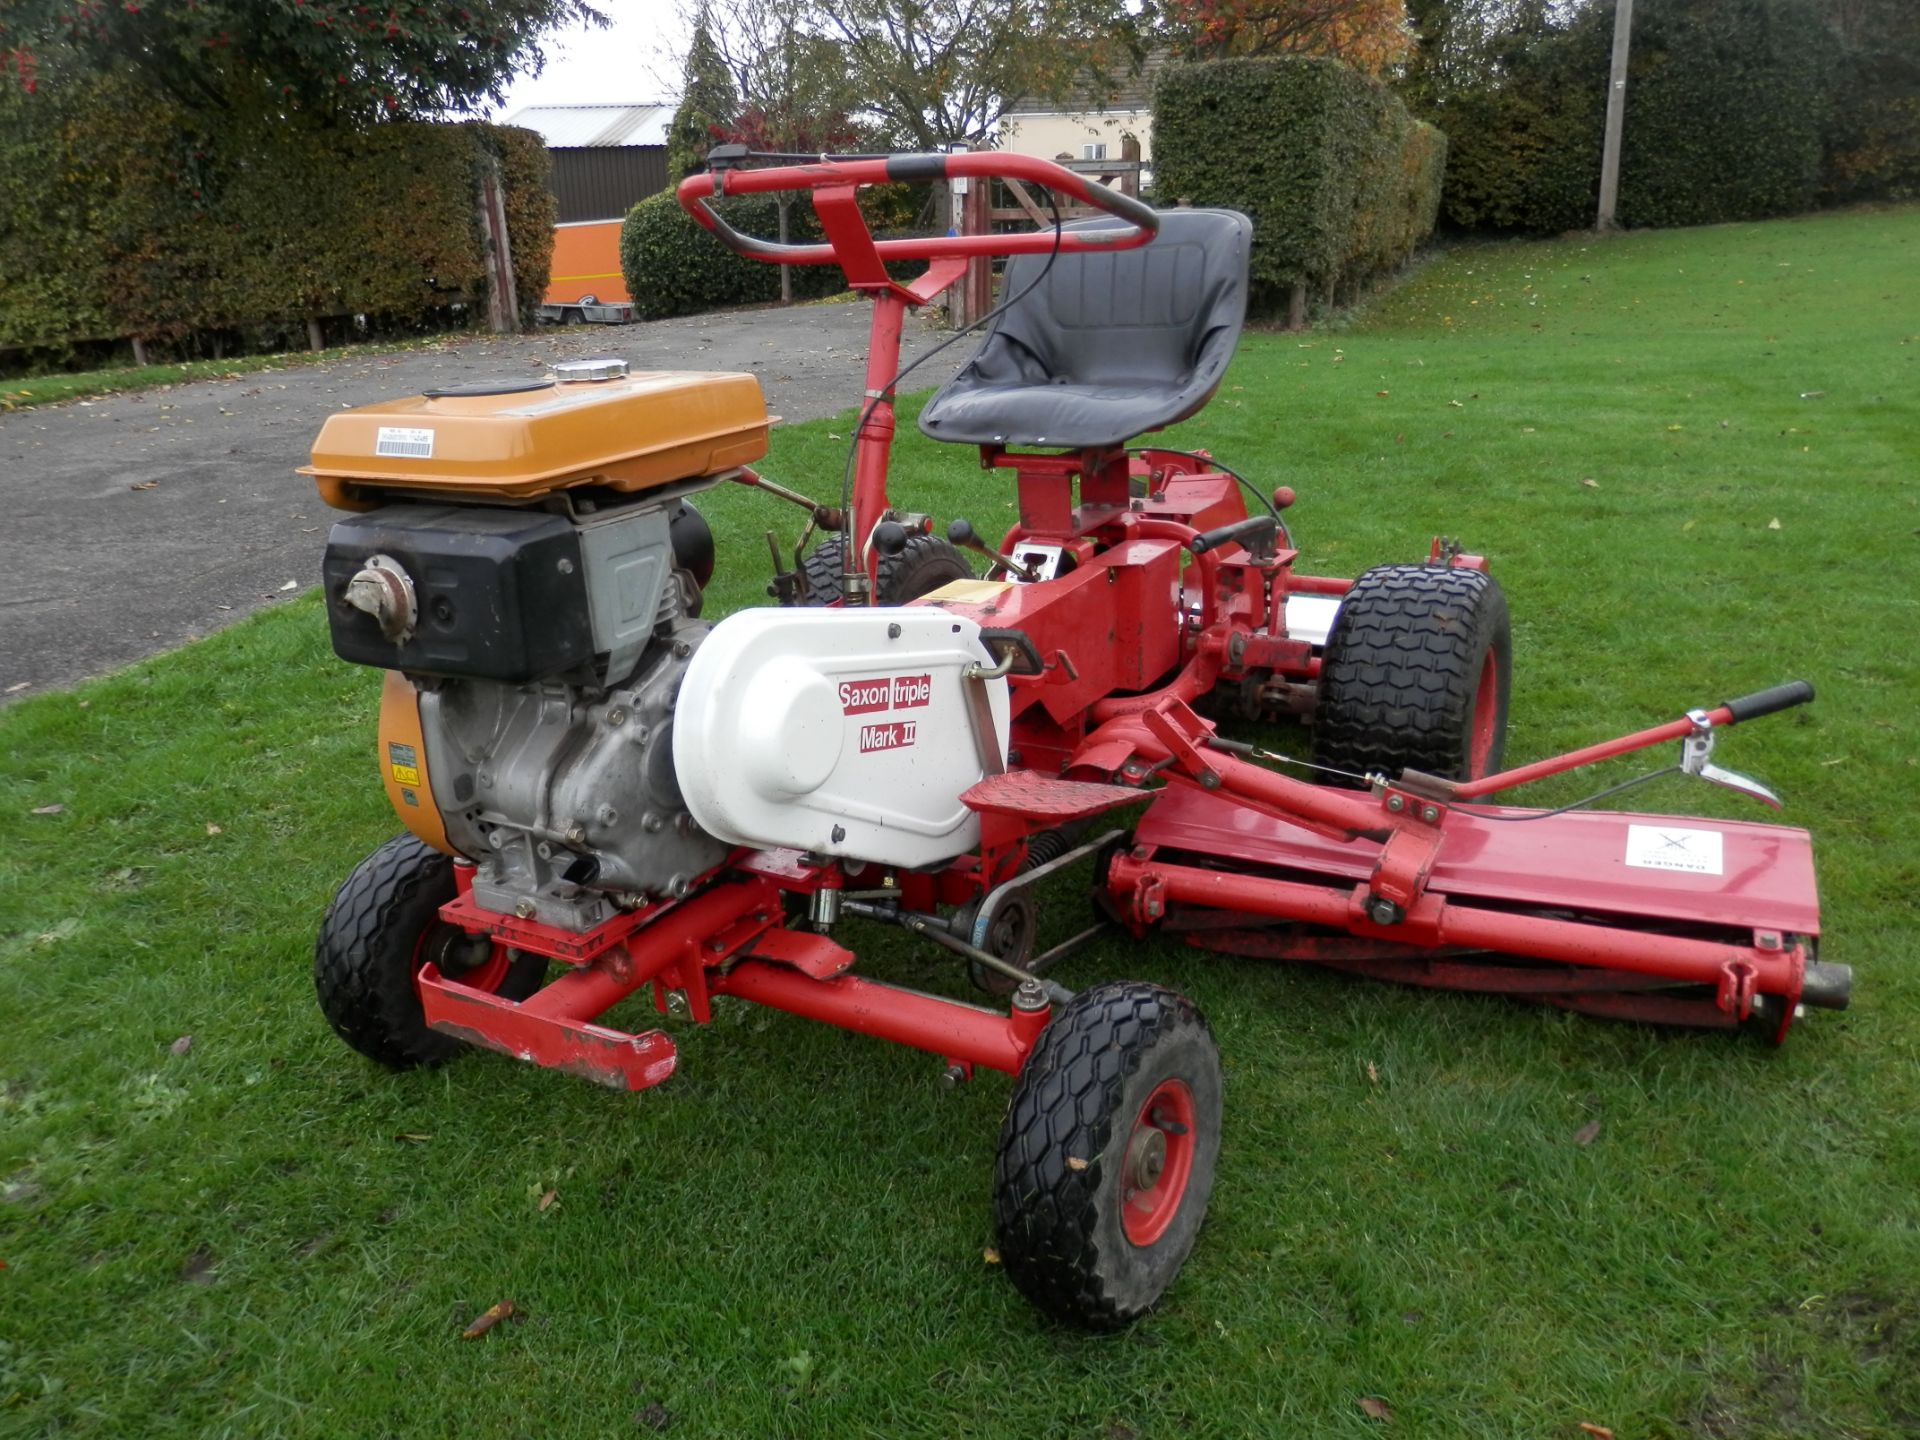 ALL WORKING SAXON TRIPLE MK2 RIDE ON MOWER, UPGRADED WITH GEARS, BRAKE PEDAL & DIFF LOCK. - Image 14 of 14